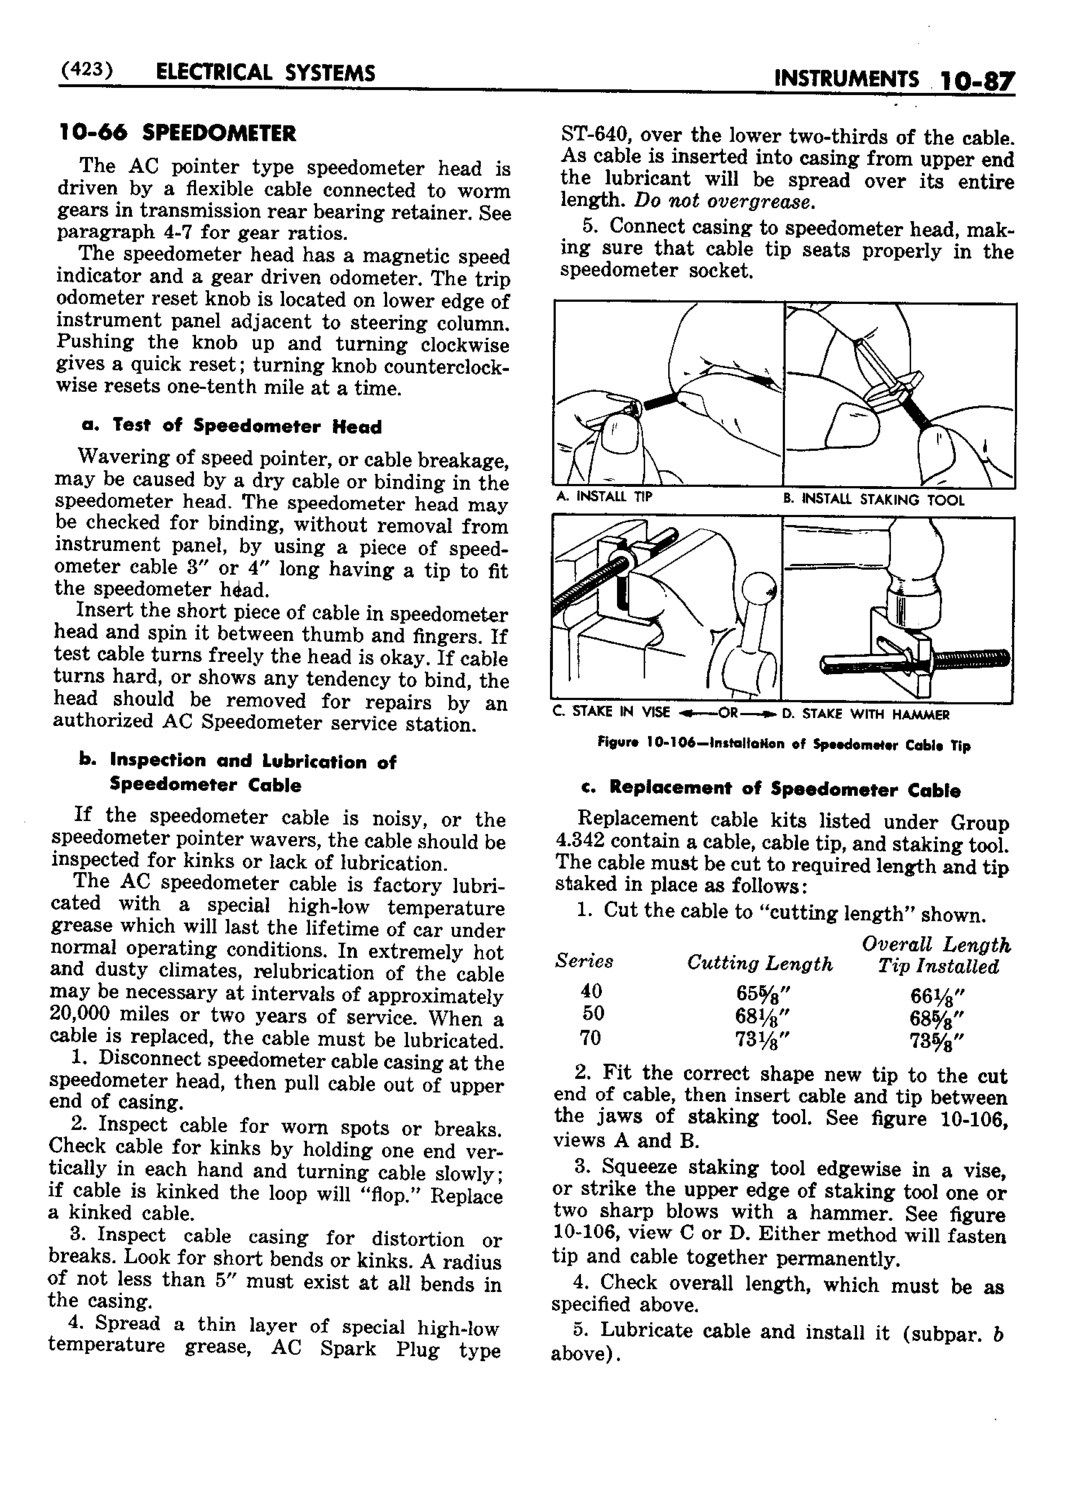 n_11 1952 Buick Shop Manual - Electrical Systems-087-087.jpg